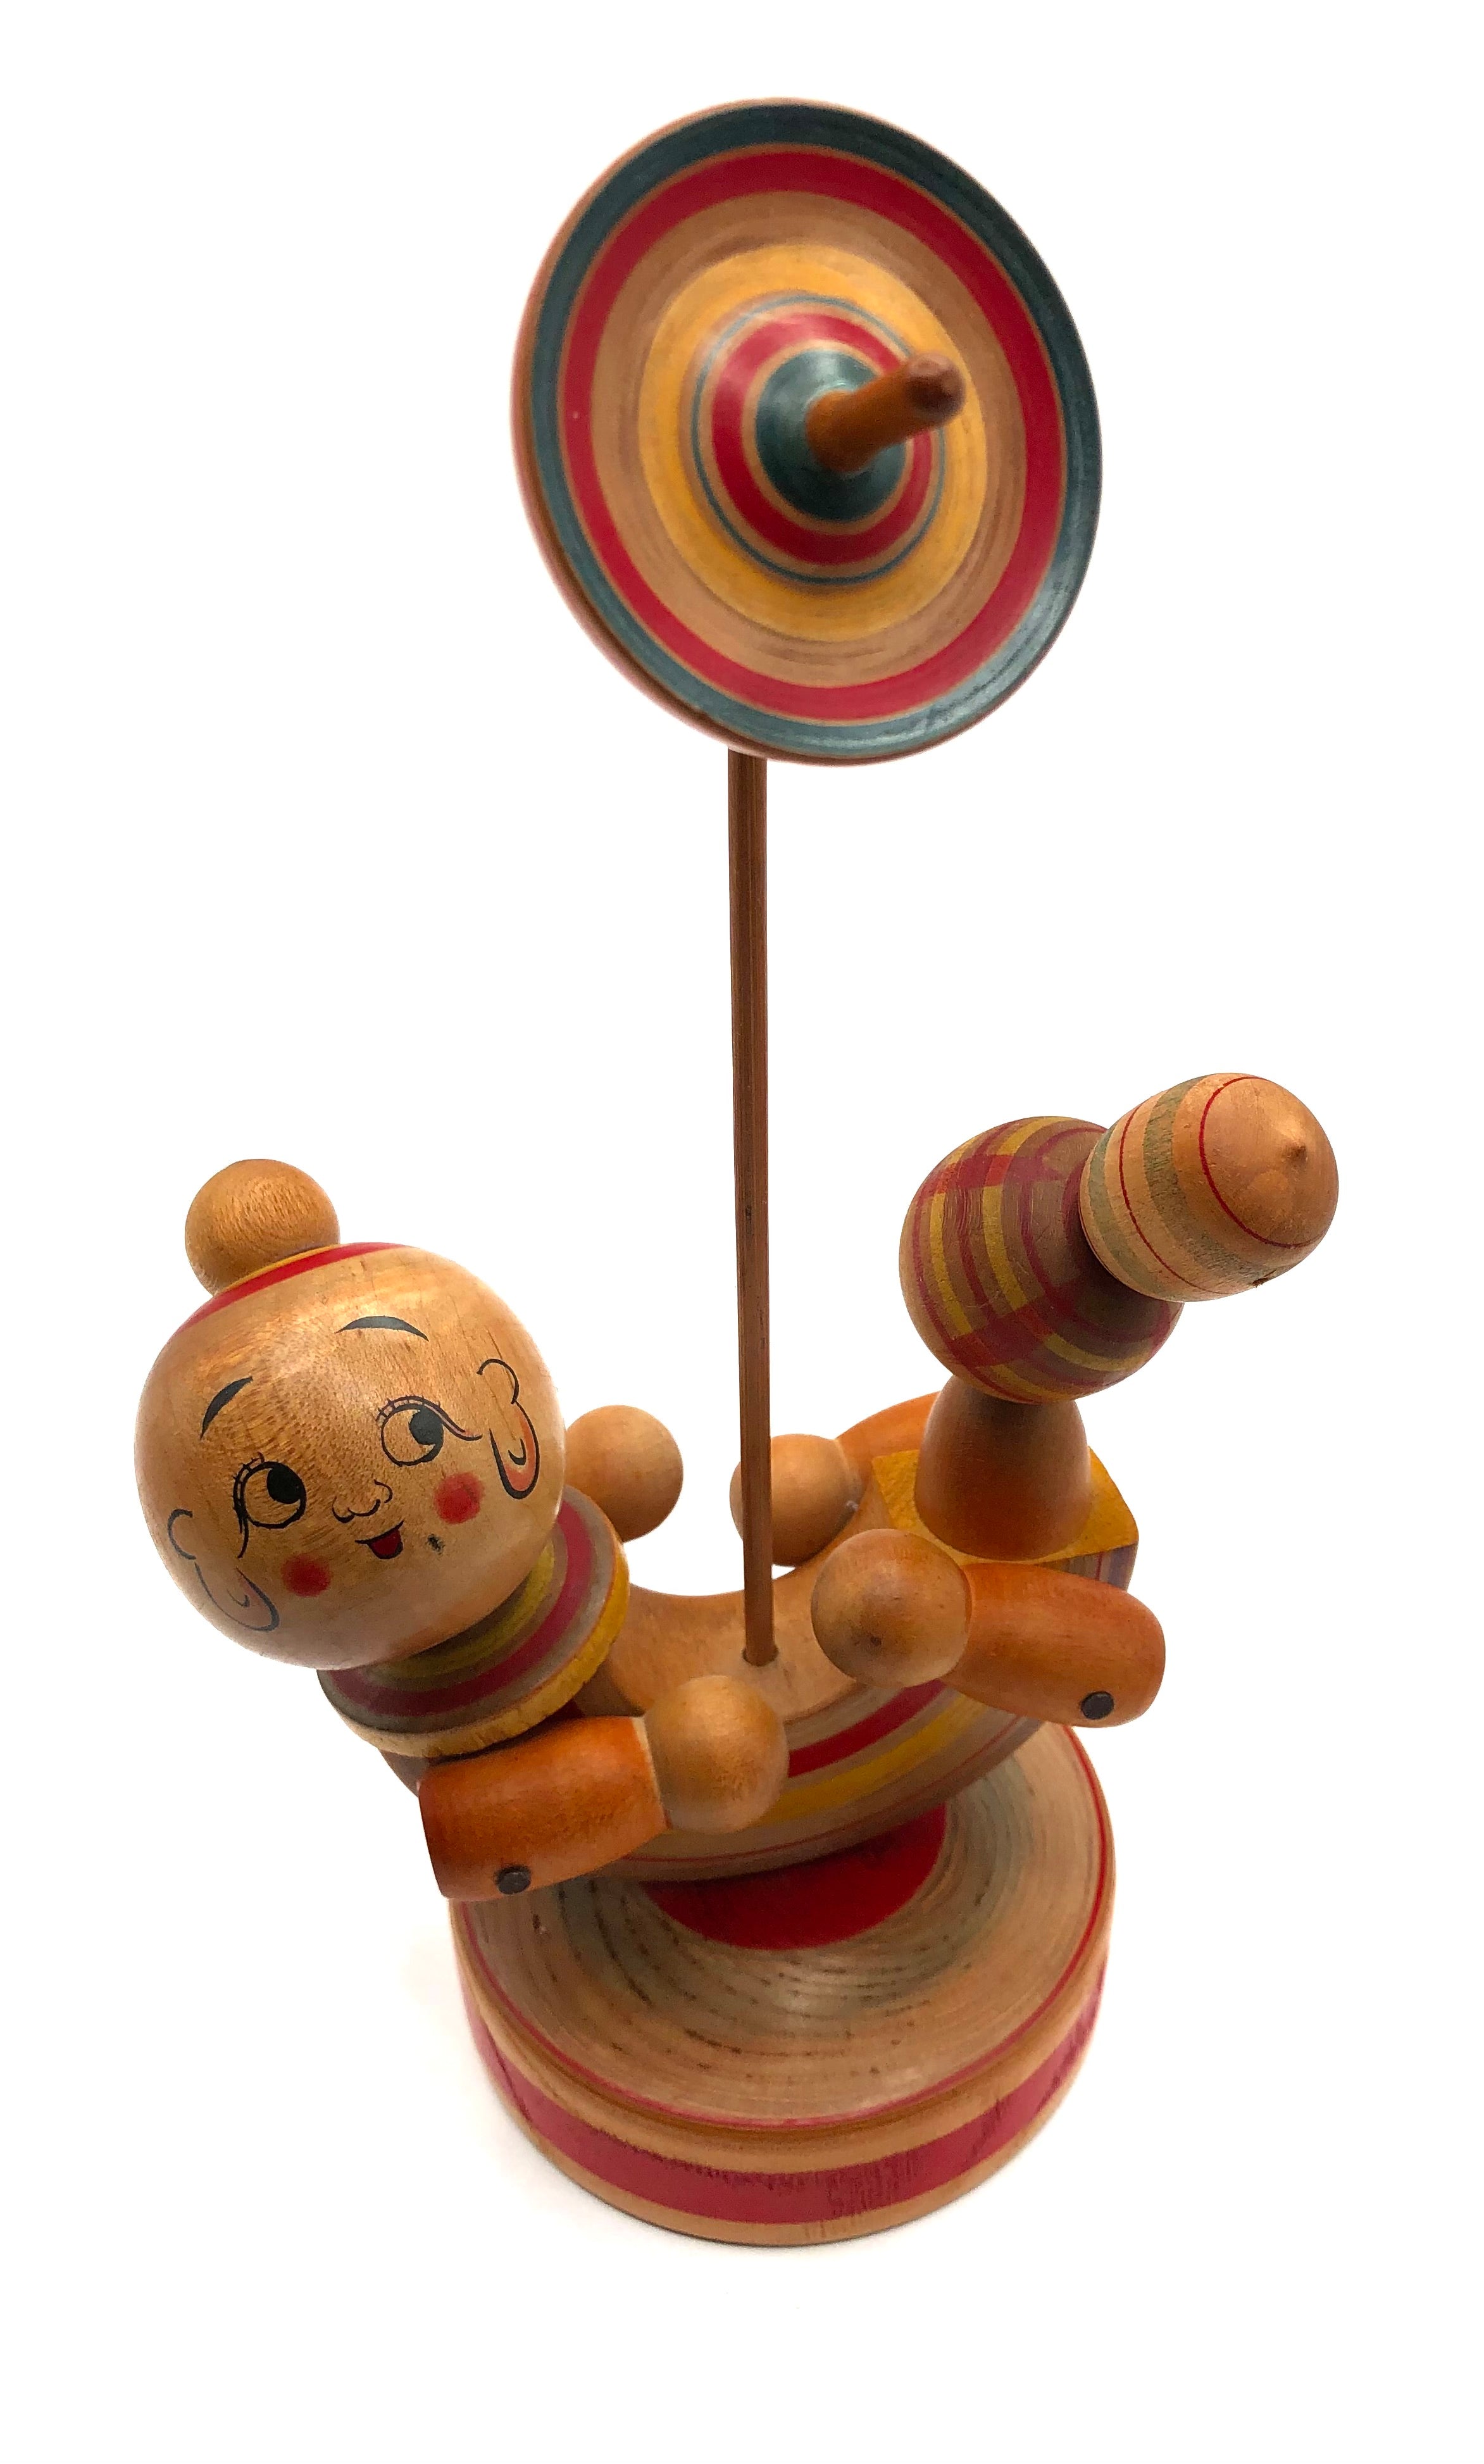 Vintage Japanese Clown Kokeshi Toy with Spinning Top by Tsuta, Mamoru (1928-2009)